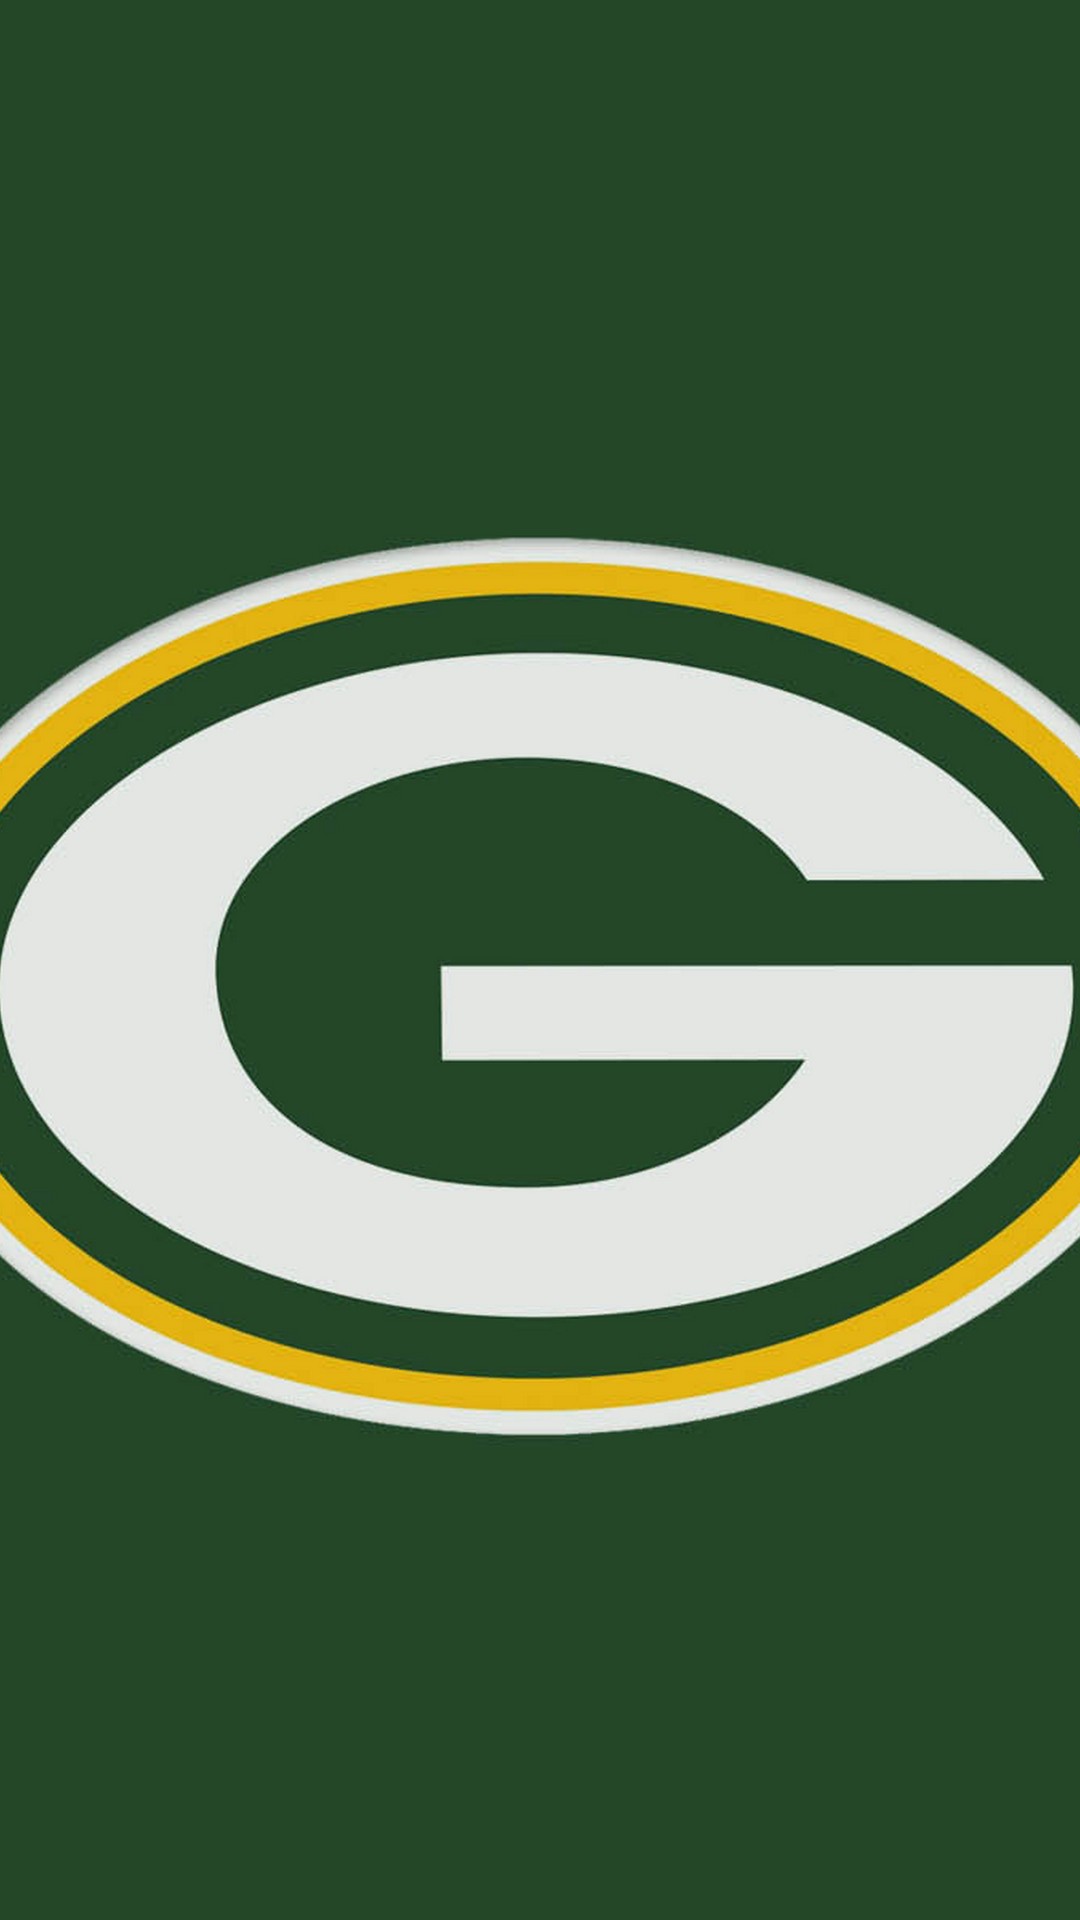 Wallpapers iPhone Green Bay Packers NFL with high-resolution 1080x1920 pixel. Donwload and set as wallpaper for your iPhone X, iPhone XS home screen backgrounds, XS Max, XR, iPhone8 lock screen wallpaper, iPhone 7, 6, SE and other mobile devices